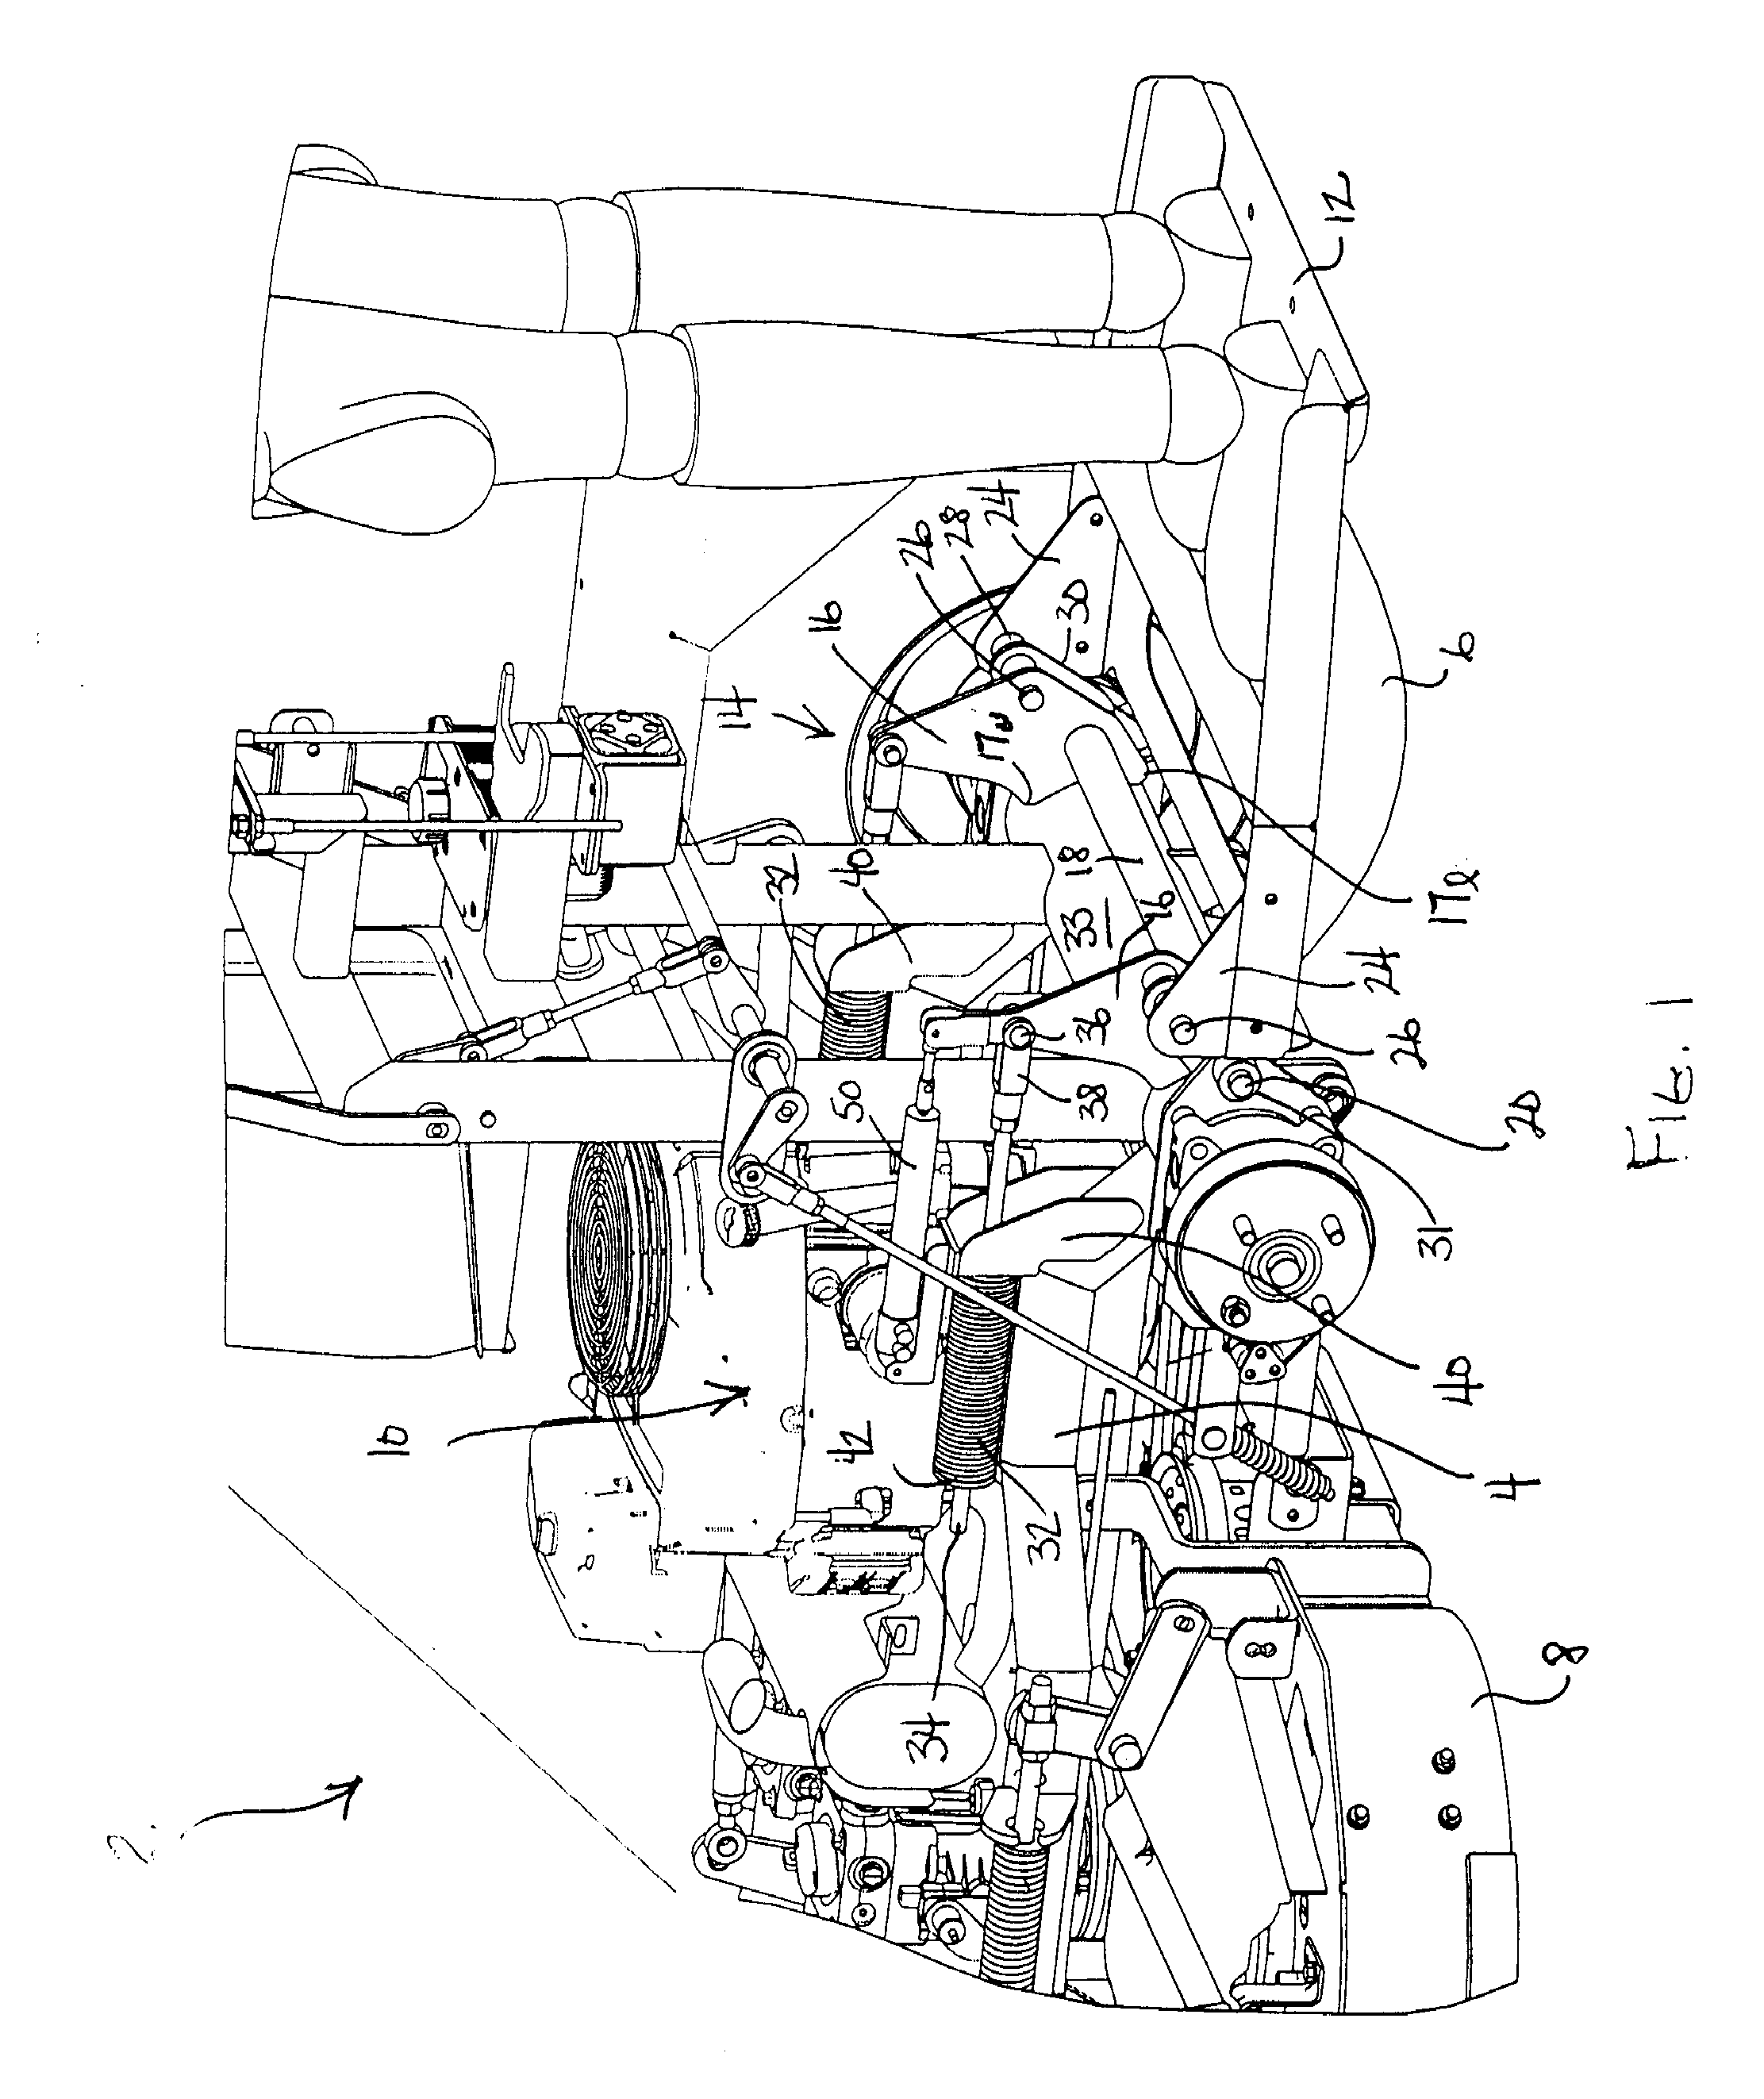 Mower with cushioned suspension for operator support platform having stowed and deployed positions